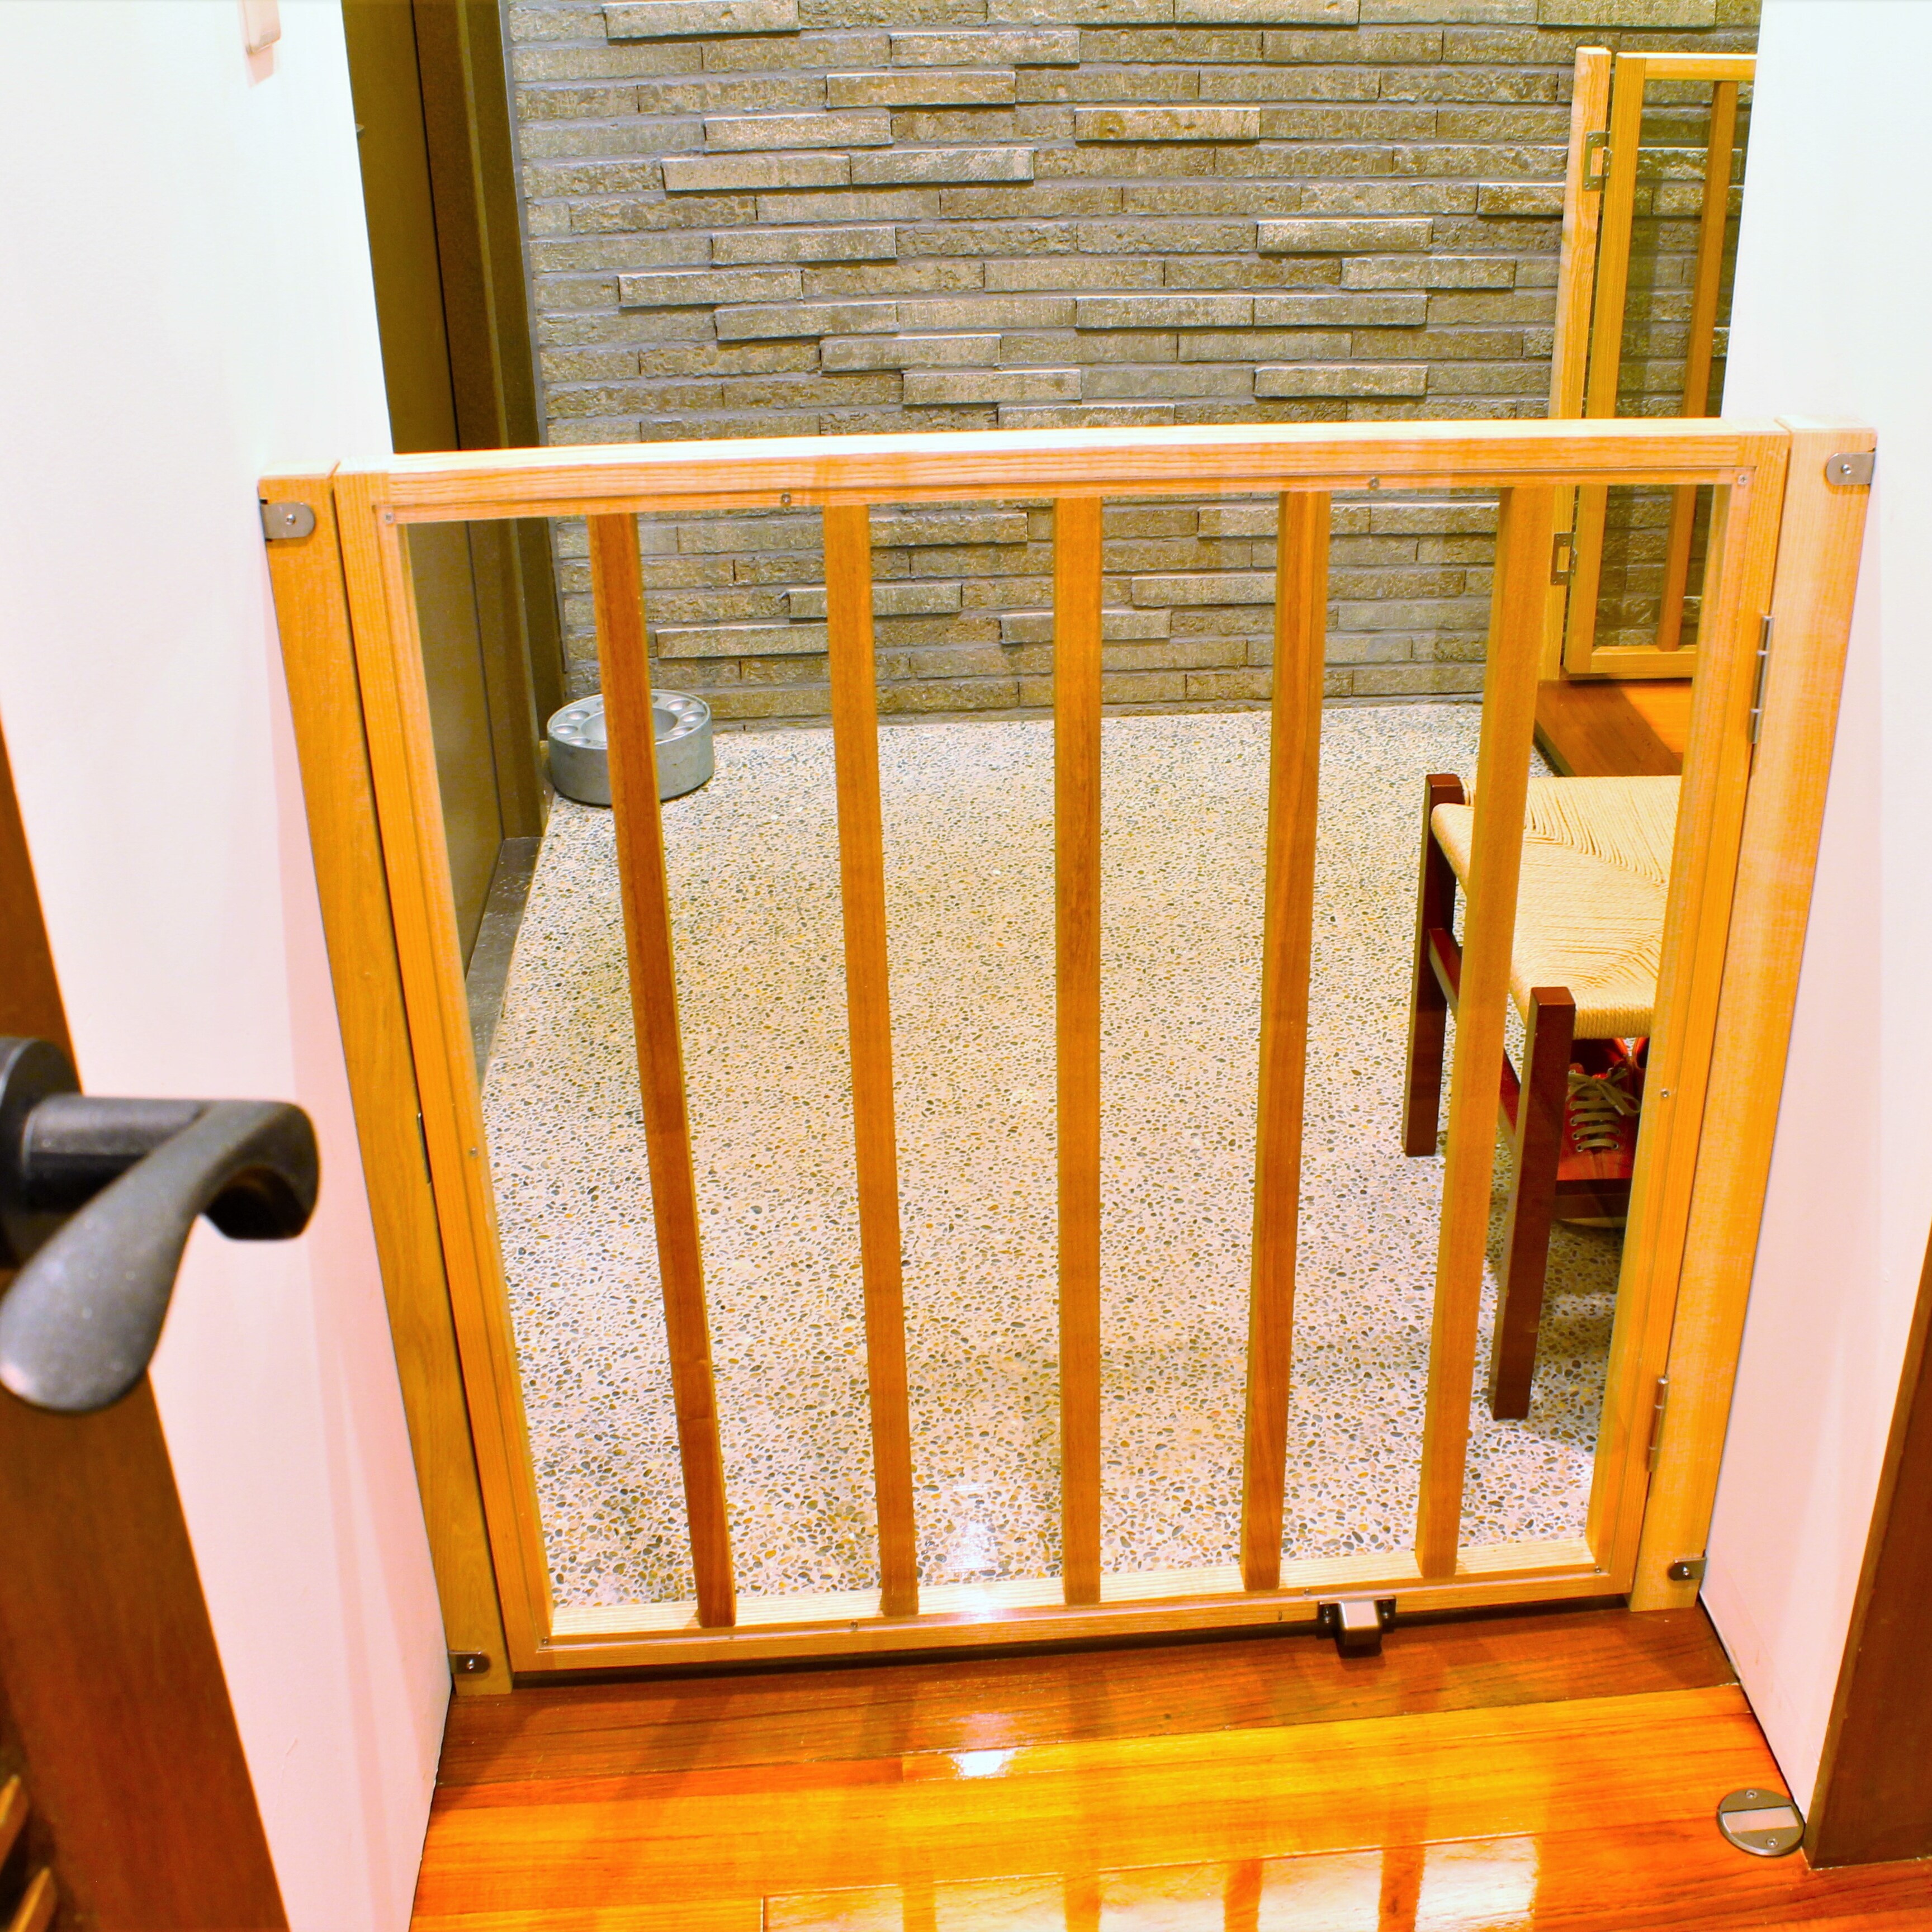 [Room equipment] Pop-out prevention gates are installed in all rooms.